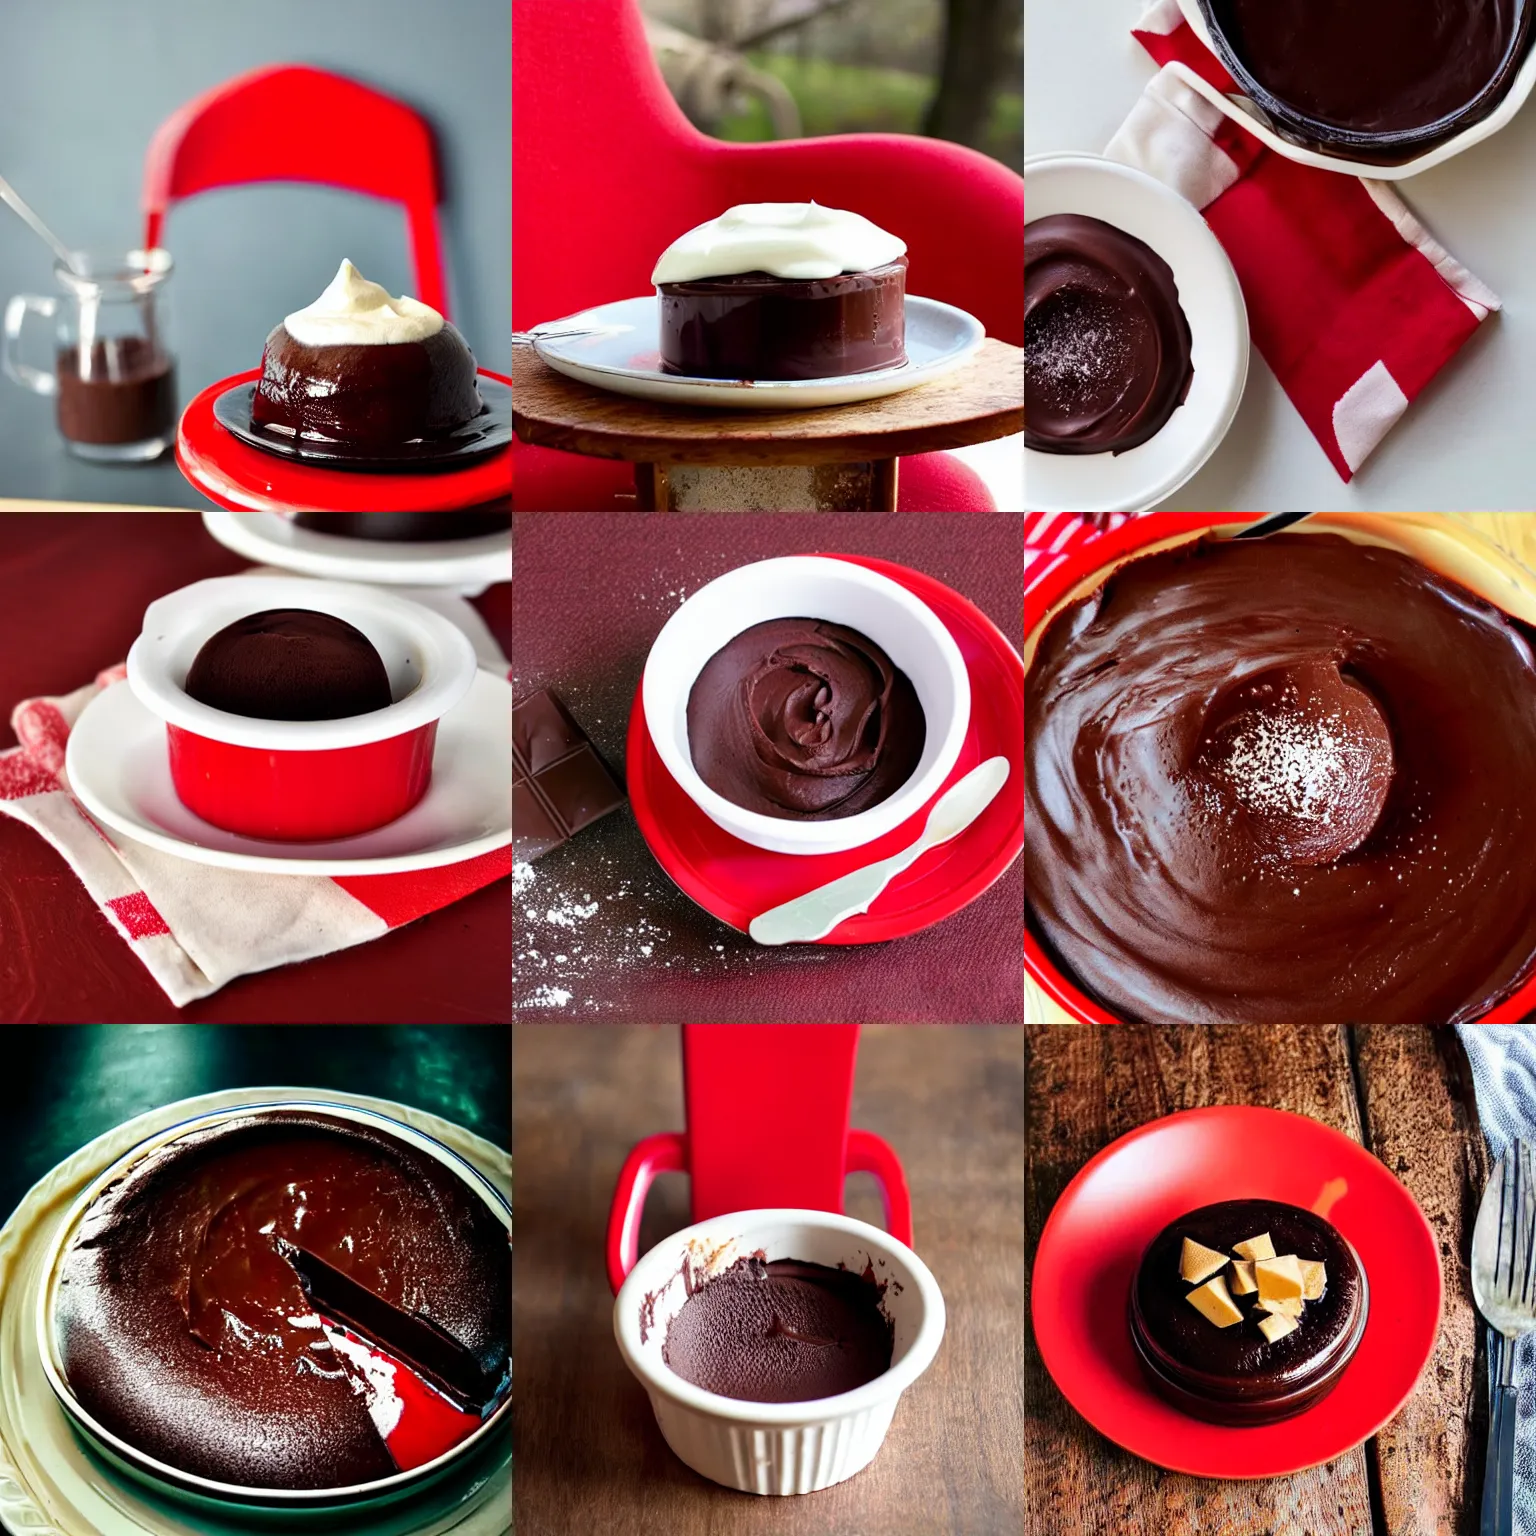 Prompt: a delicious chocolate pudding served in a little red chair